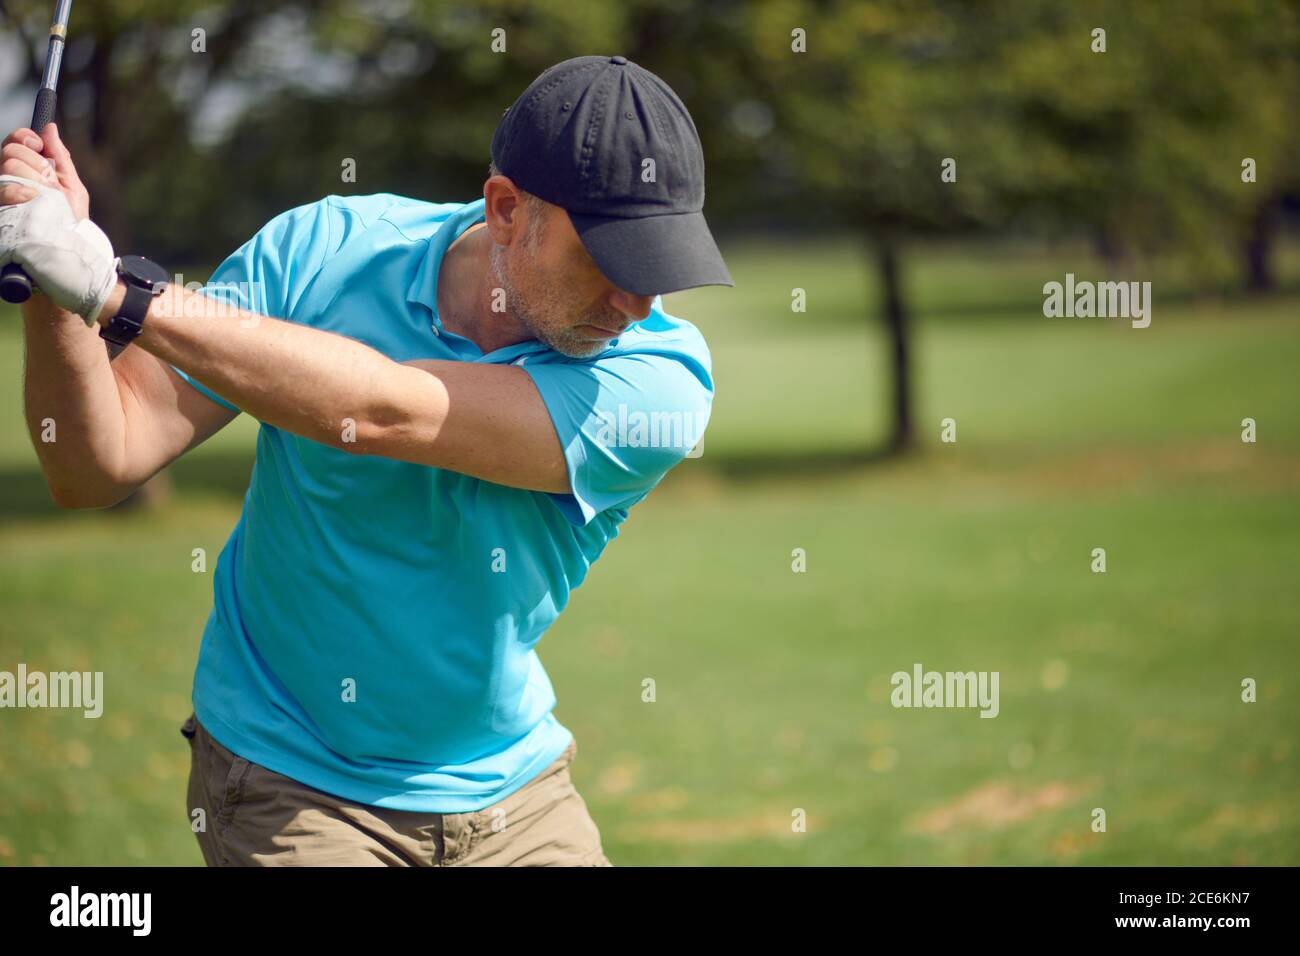 Male golfer swinging at the ball with a driver as he takes his shot on a golf course in a closeup upper body view in a healthy active lifestyle concep Stock Photo